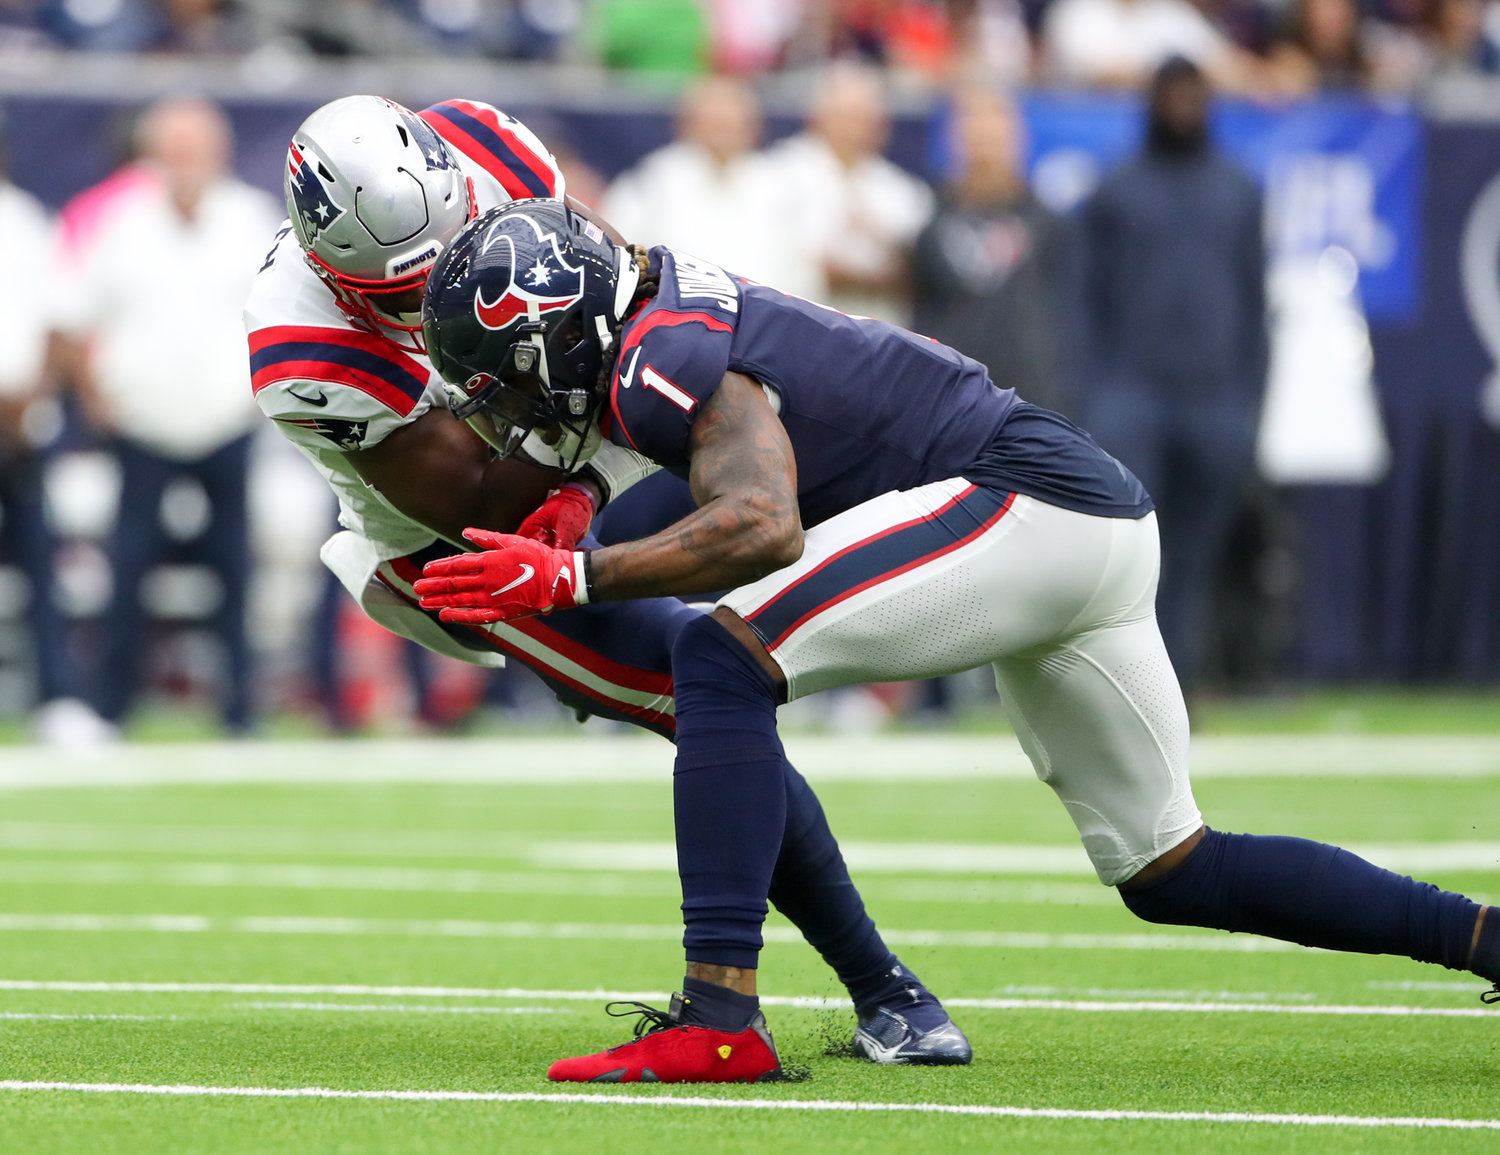 Houston Texans safety Lonnie Johnson (1) is flagged for unnecessary roughness for this helmet-to-helmet hit on New England Patriots tight end Jonnu Smith (81) during an NFL game between Houston and New England on October 10, 2021 in Houston, Texas.